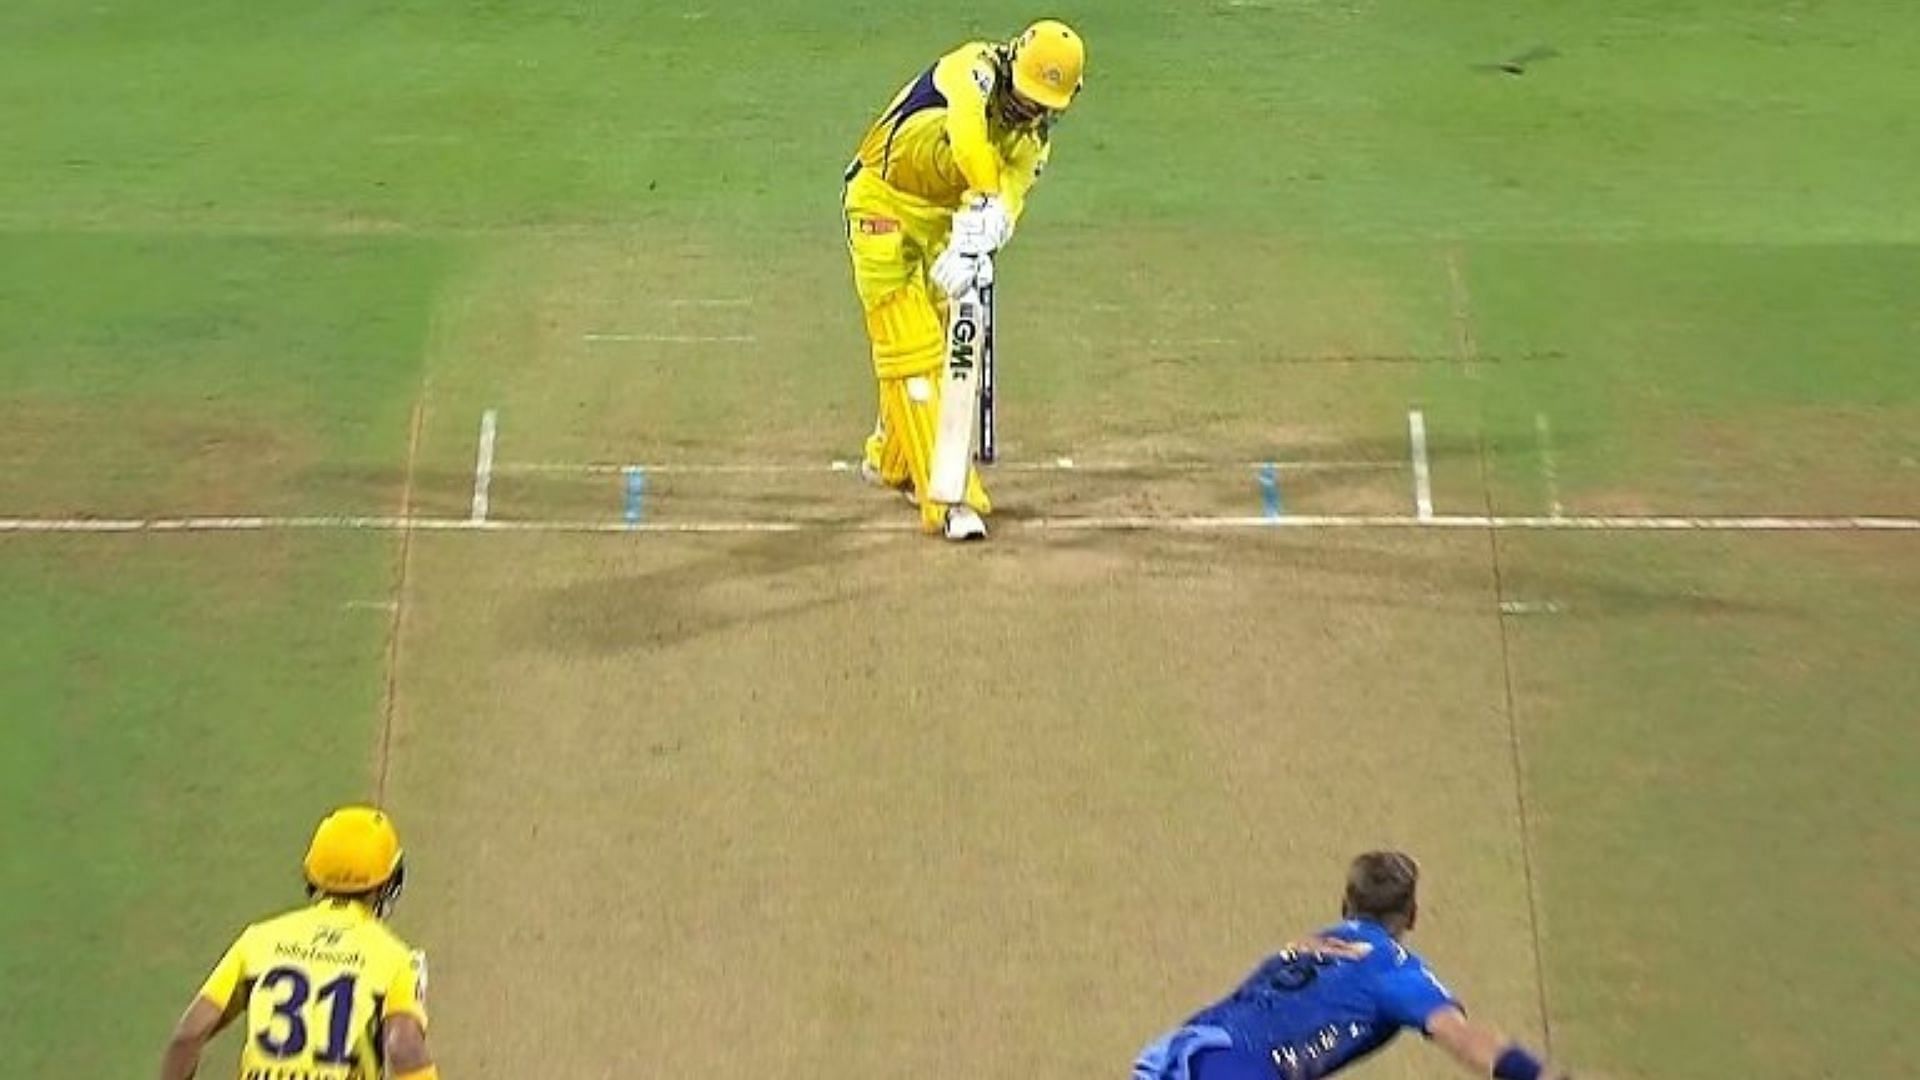 Devon Conway would consider himself unlucky to get a dodgy LBW decision during the absence of DRS. (P.C.:iplt20.com)